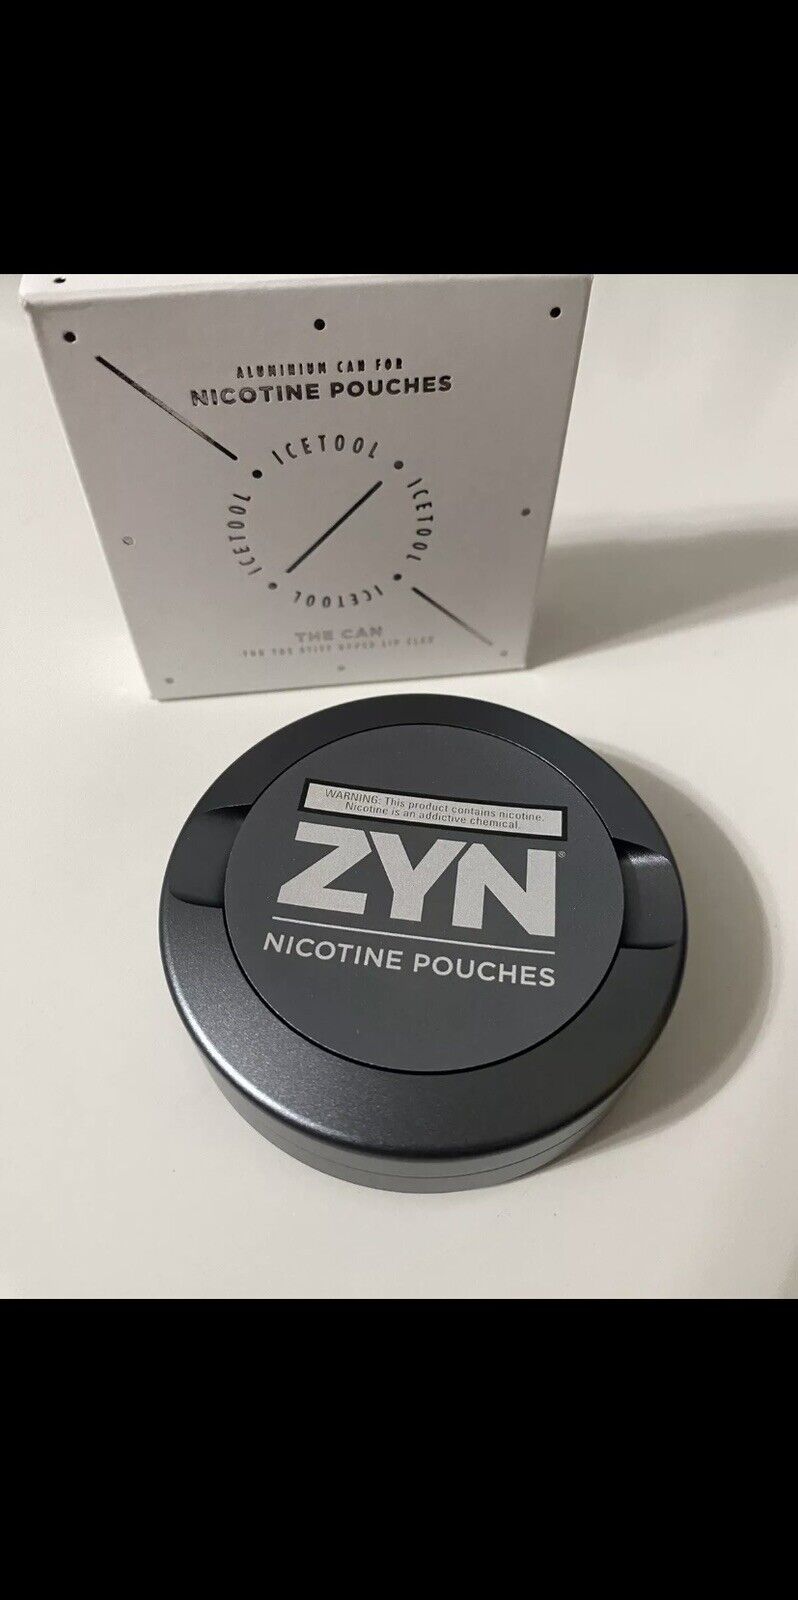 Metal ZYN Can Grey - Brand New in Box, Authentic, Rare, Sold Out Reward